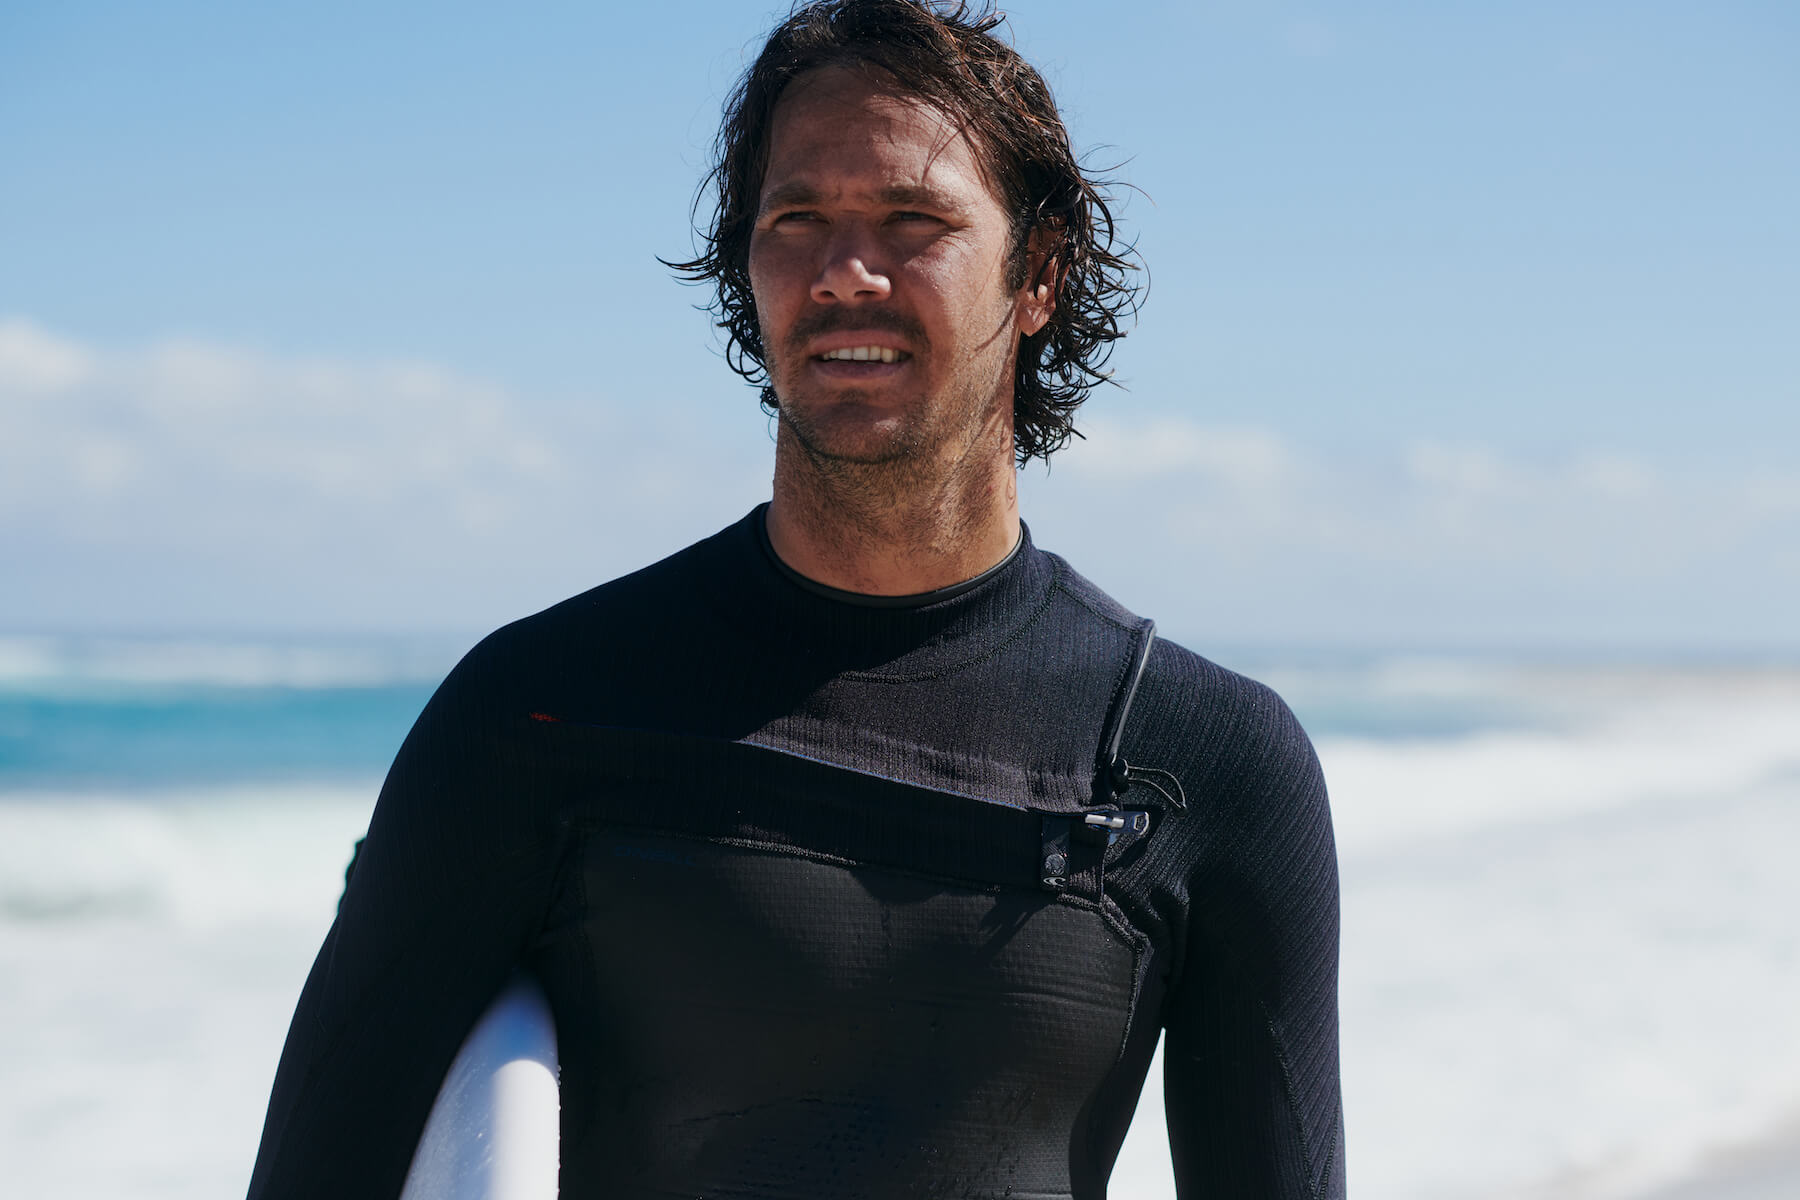 O'Niell Mens Wetsuit for surfing